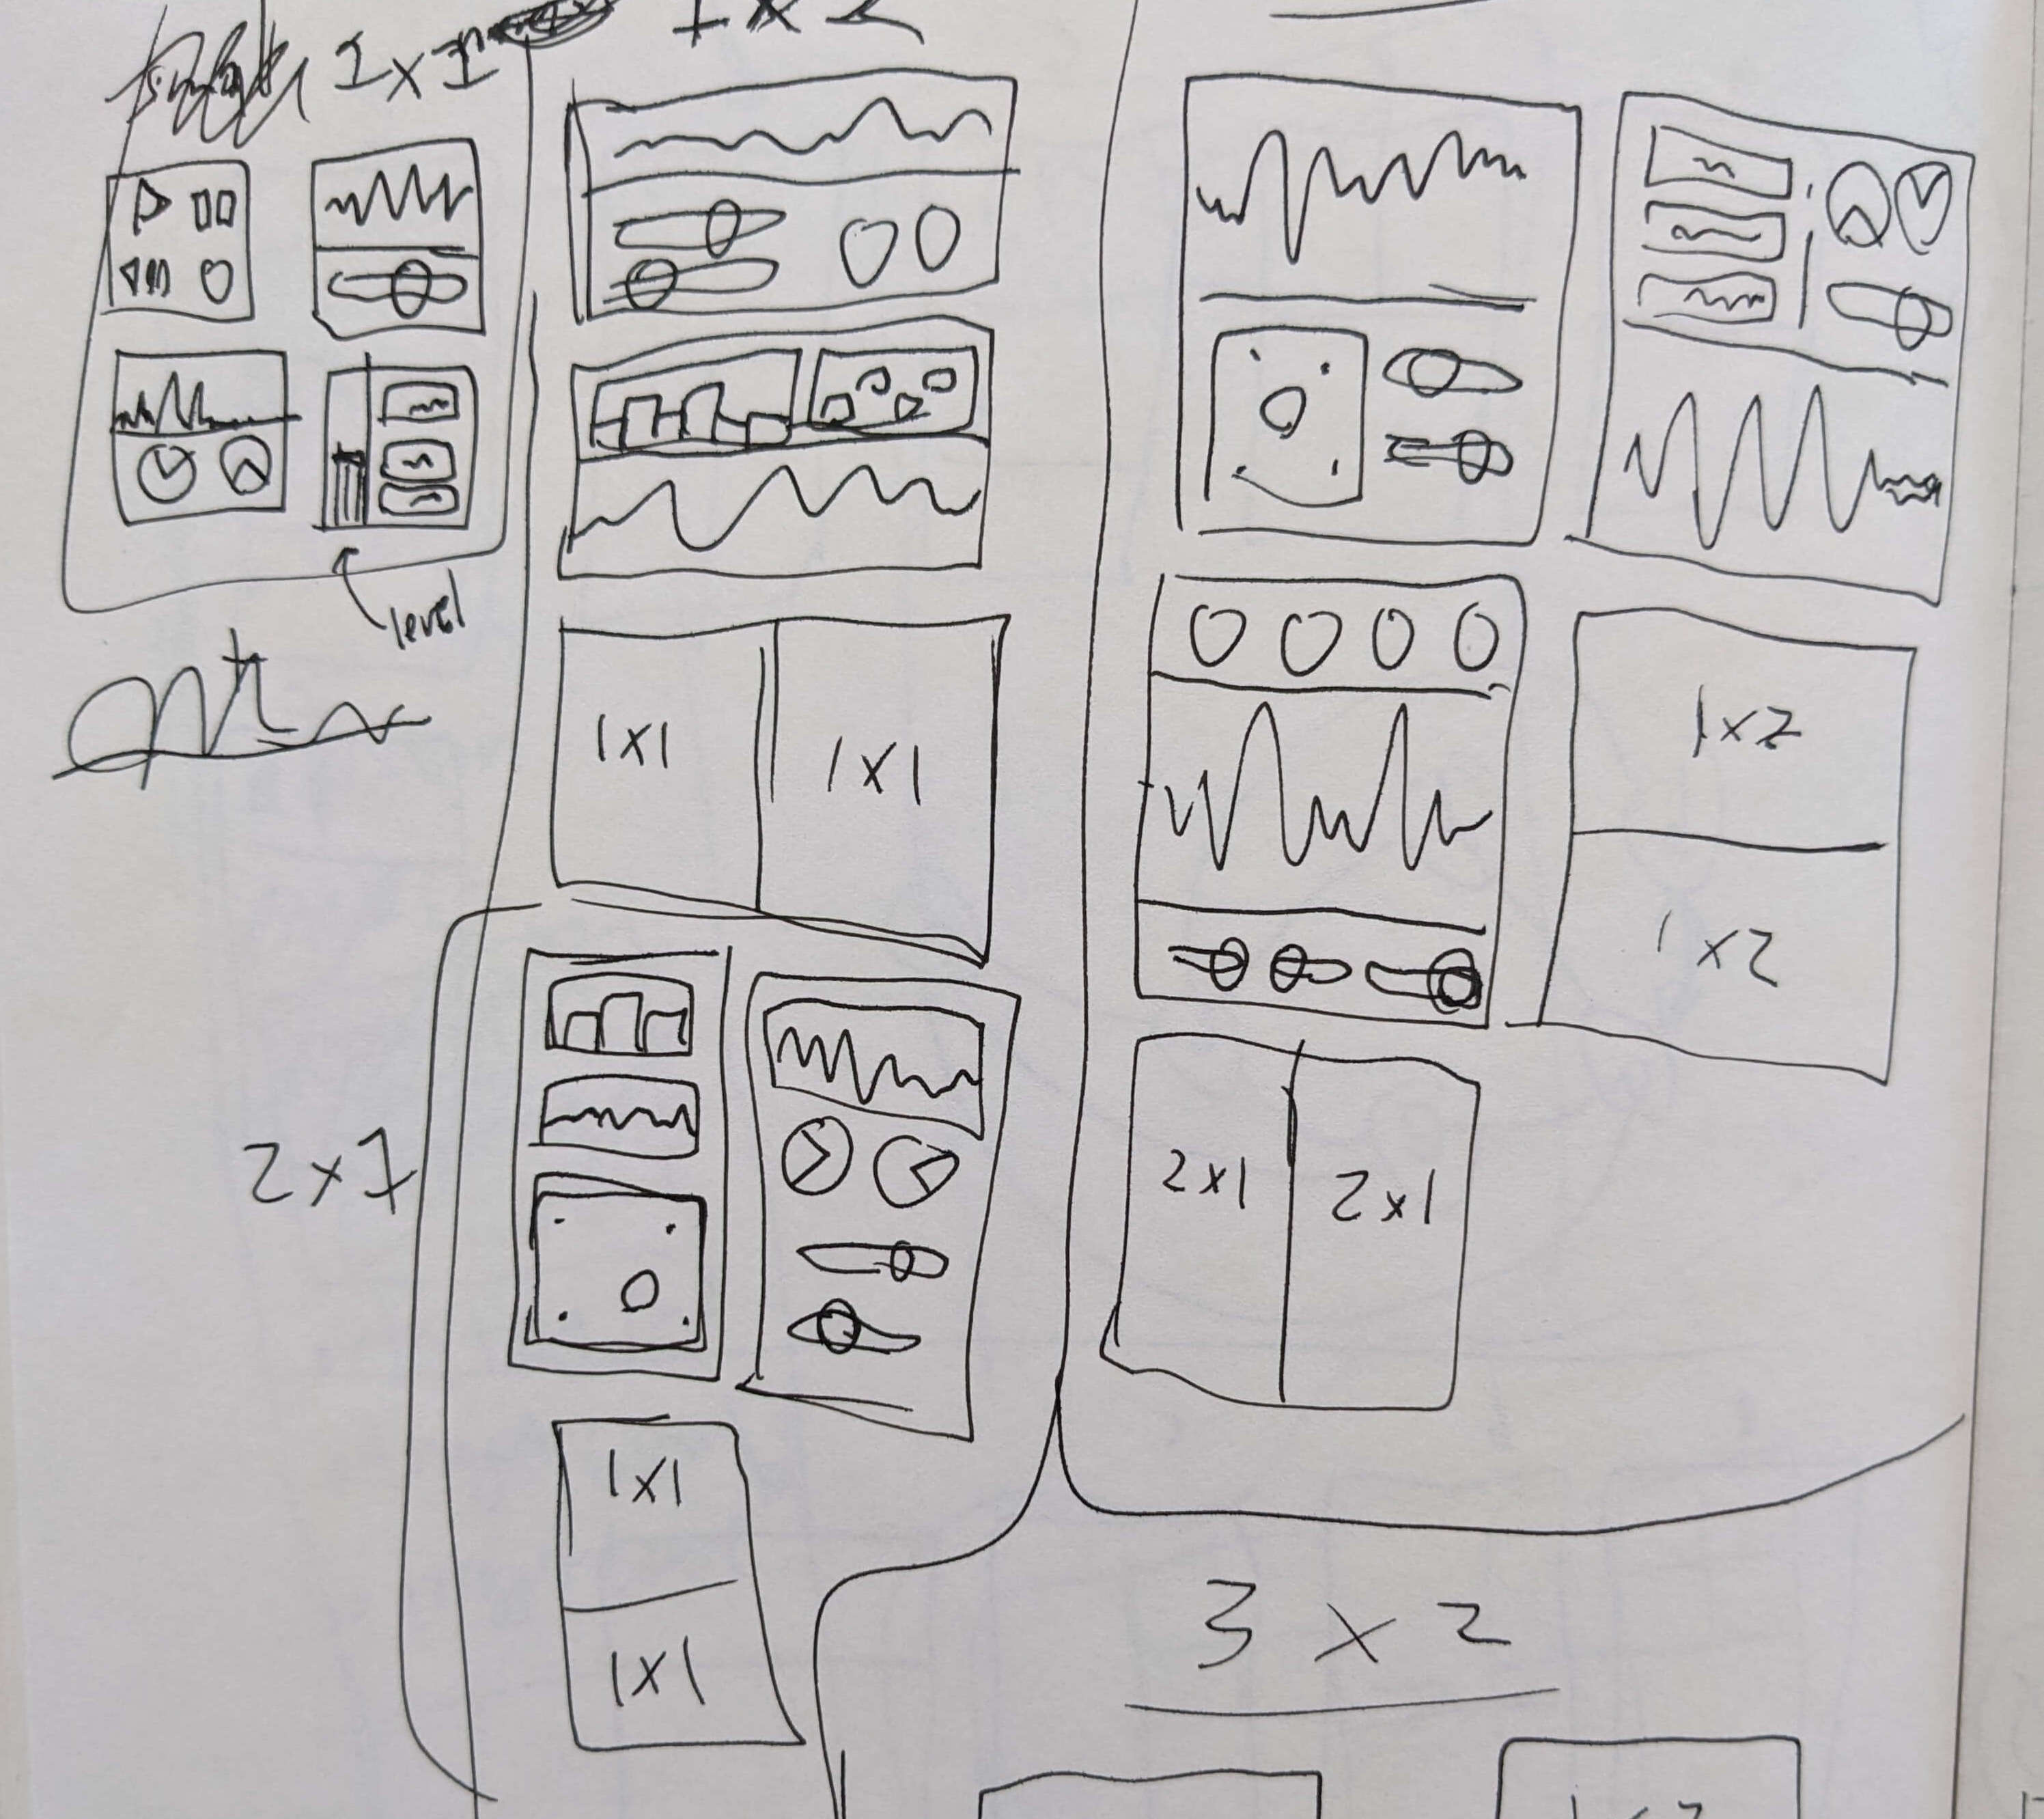 Initial sketches of the UI